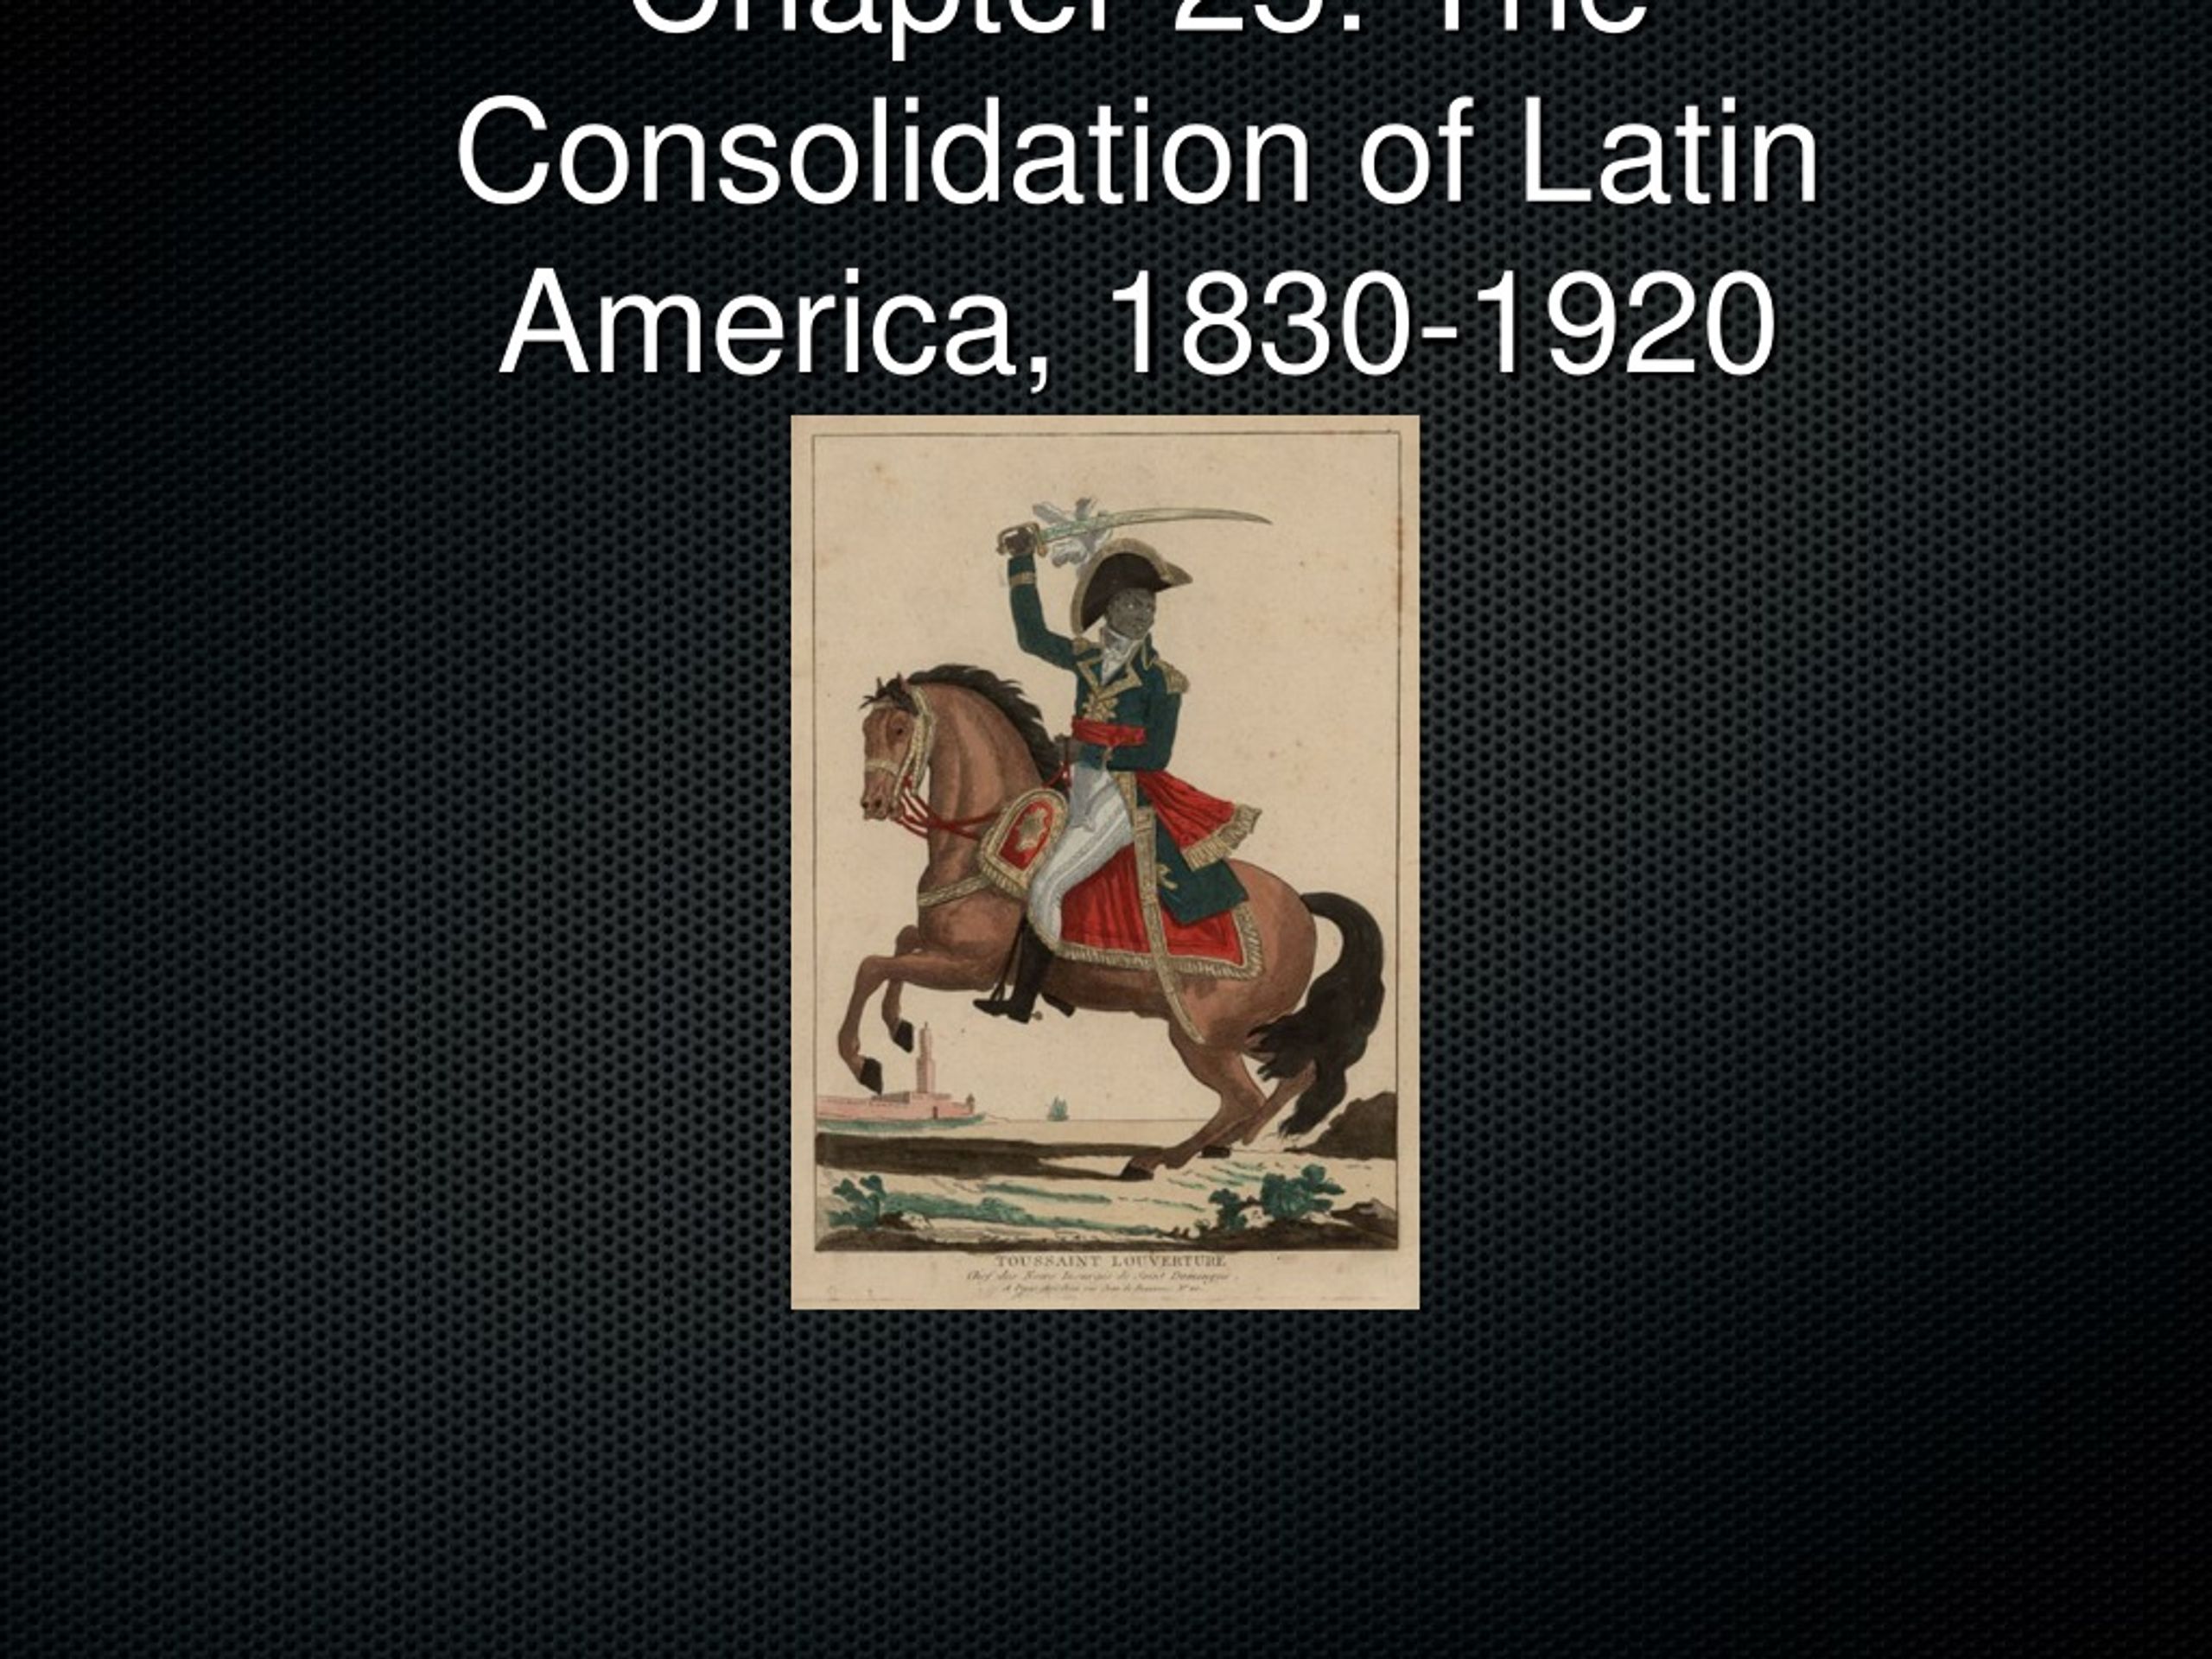 Ppt Chapter 25 The Consolidation Of Latin America 1830 1920